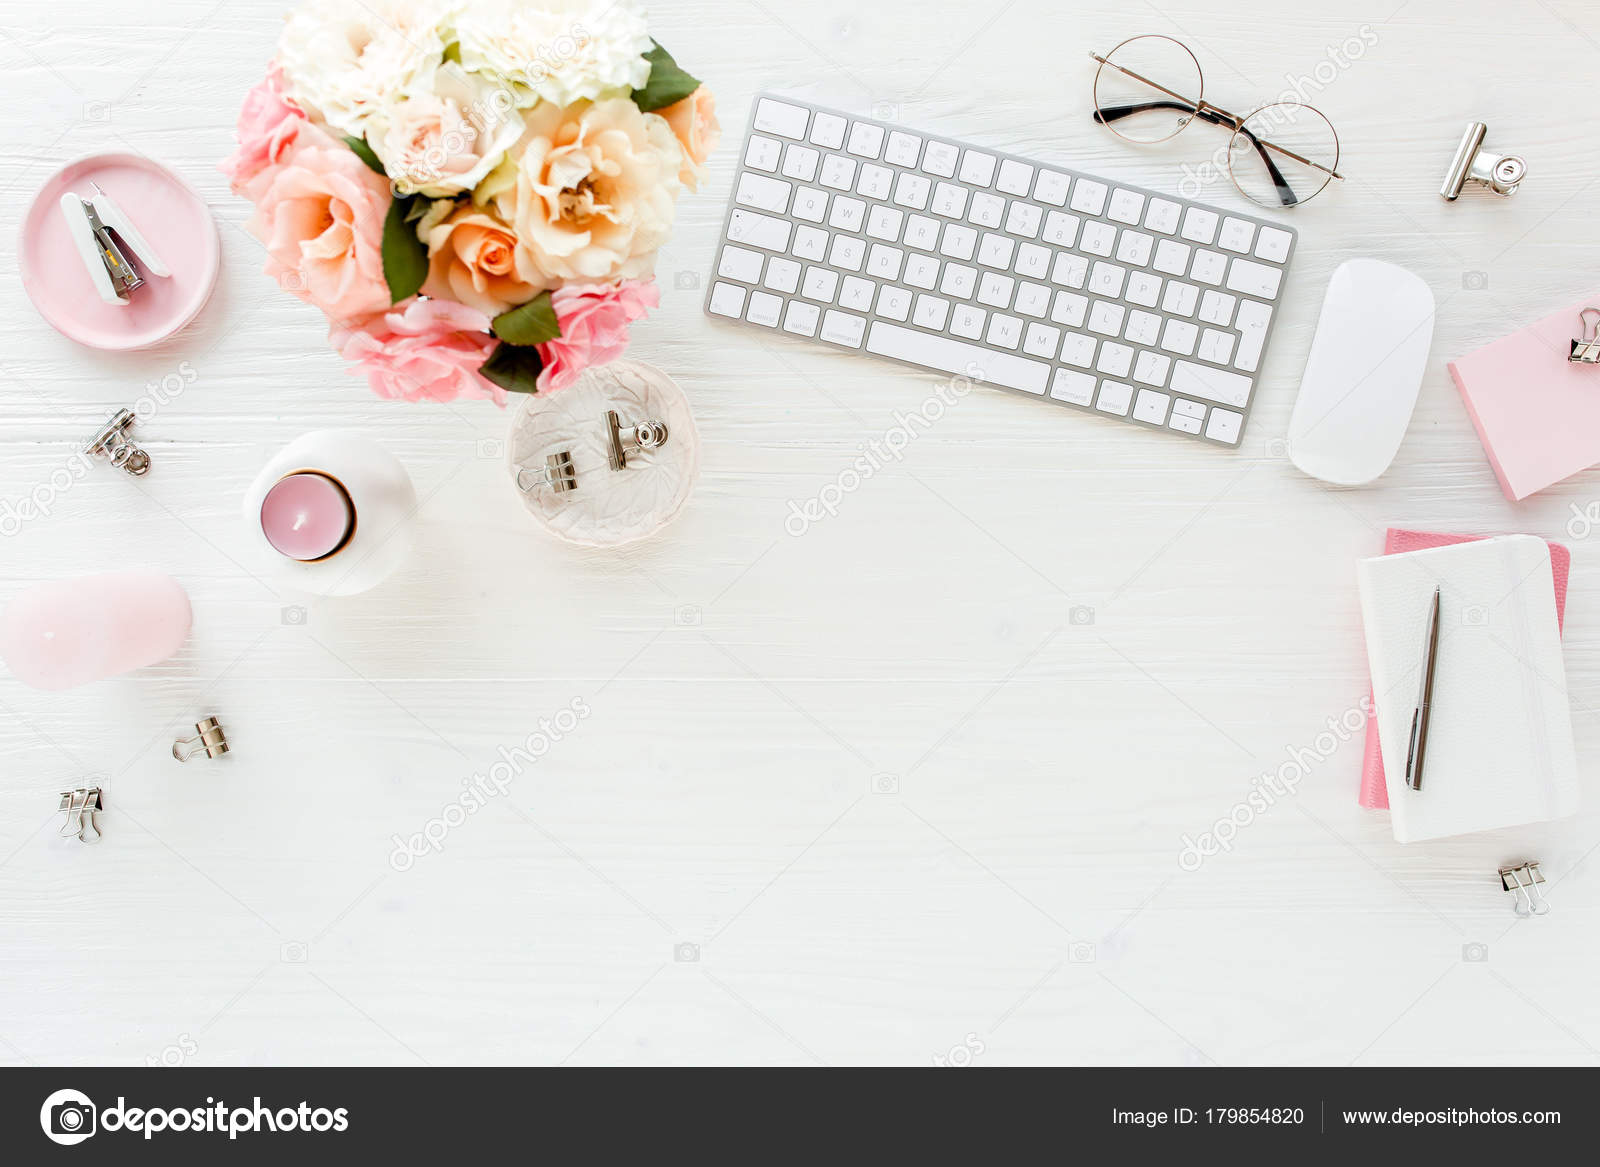 Flat Lay Women's Office Desk Female Workspace Computer Pink Roses Stock  Photo by © 179854820